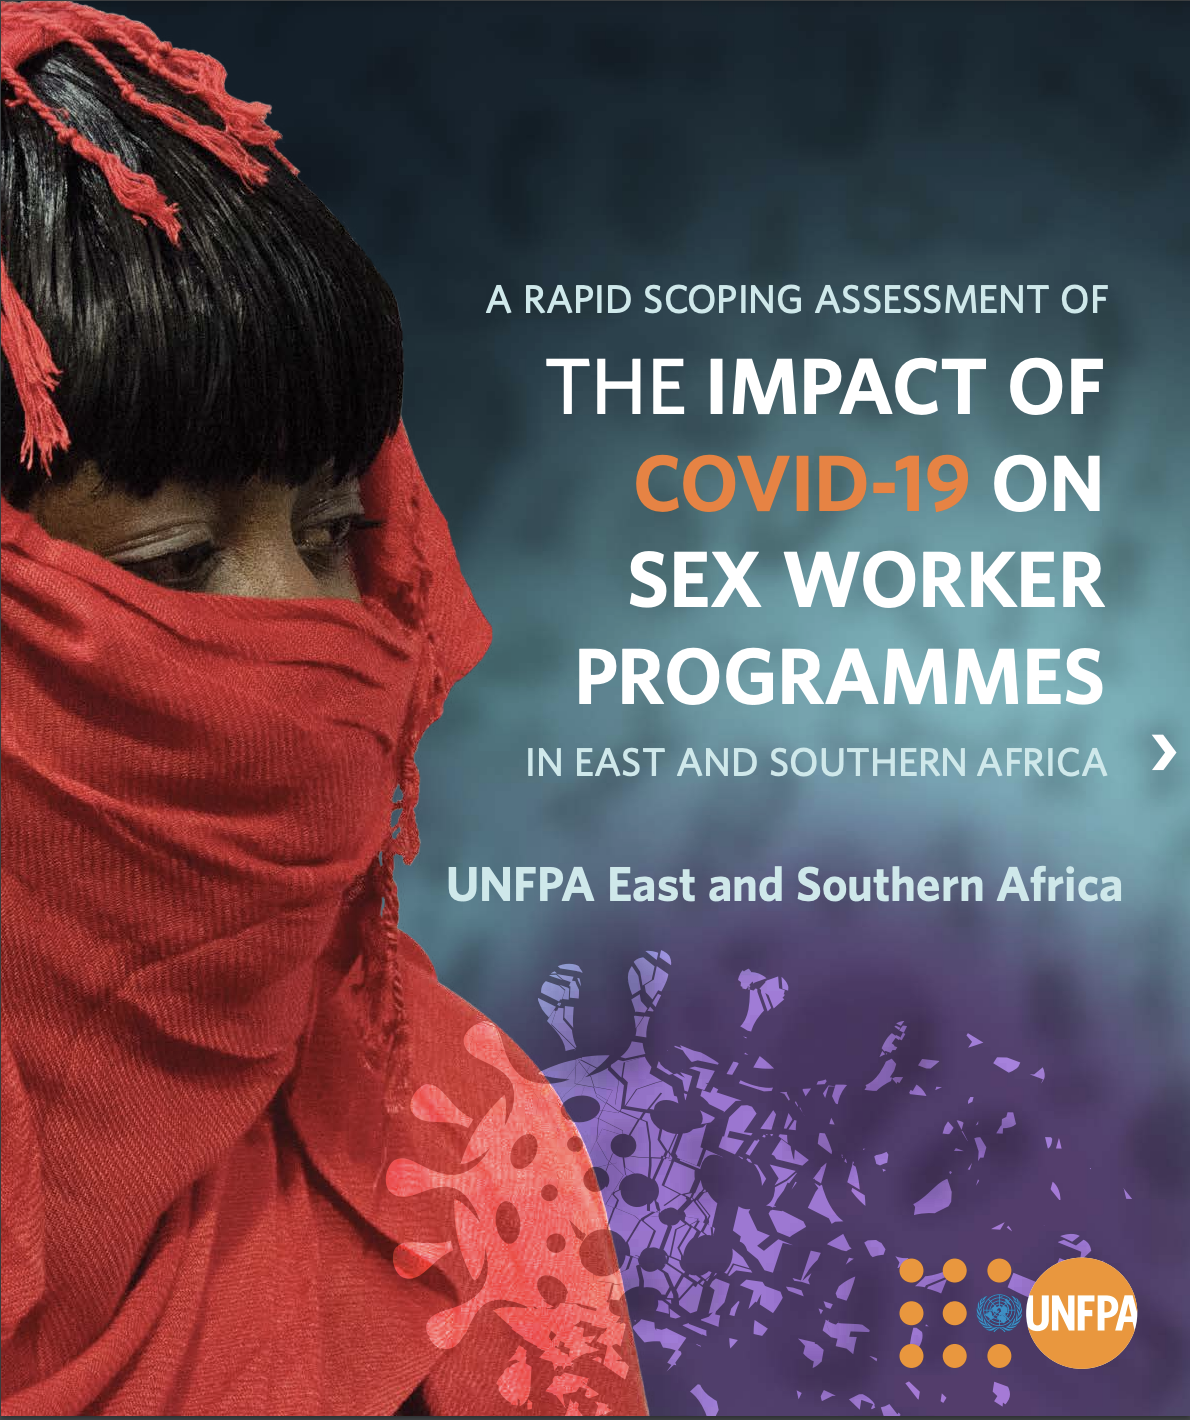 A Rapid Scoping Assessment of the Impact of COVID-19 on Sex Worker Programmes in East and Southern Africa